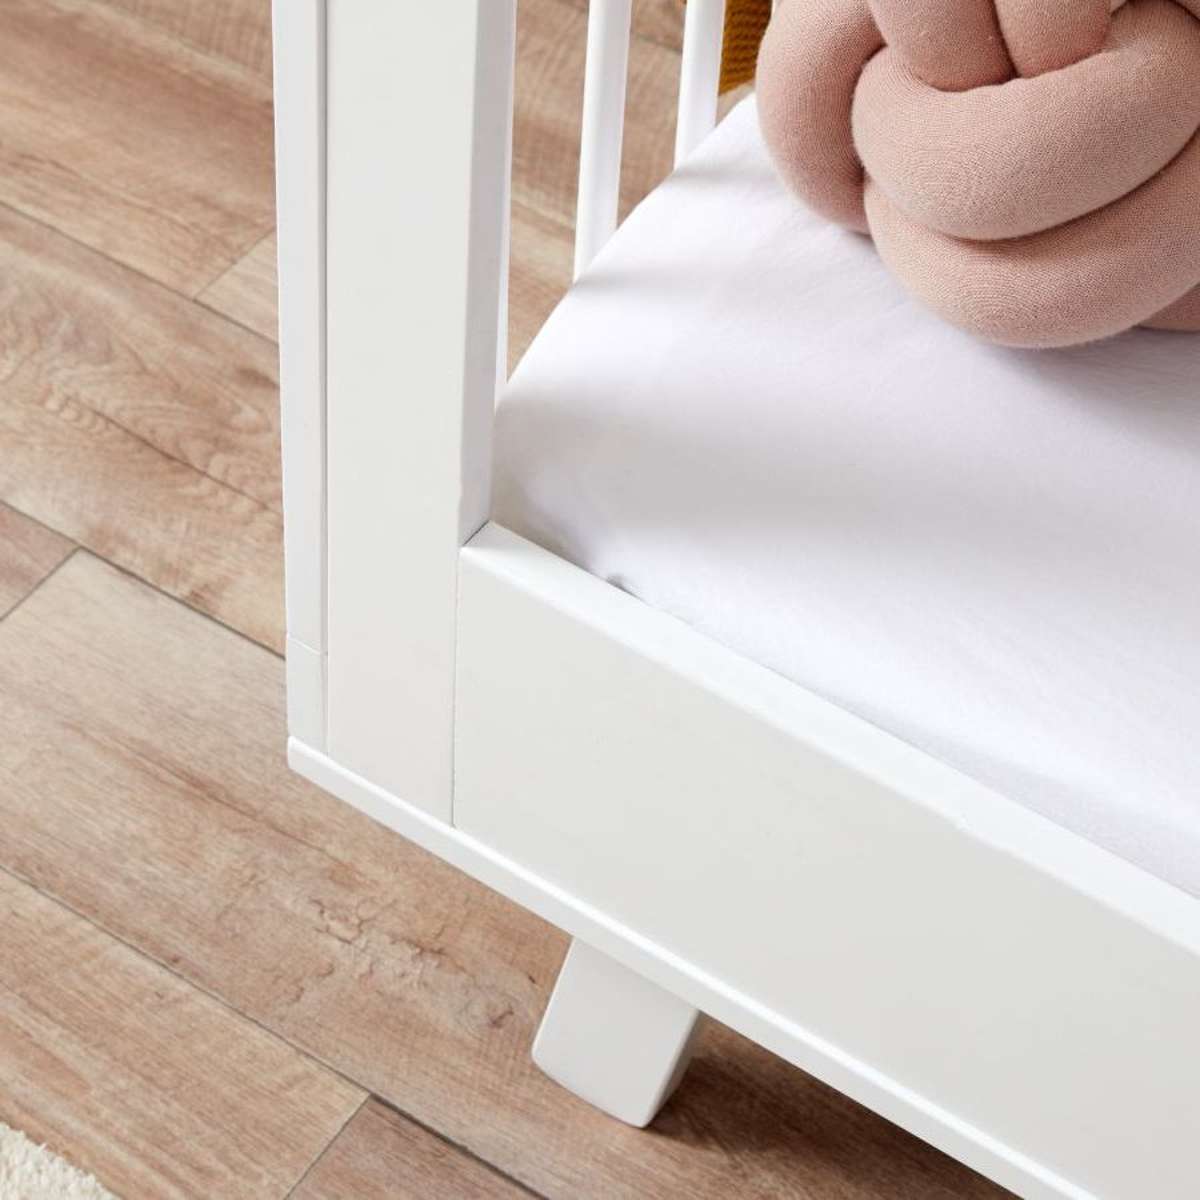 Aspen Cot Toddler Bed Conversion - White